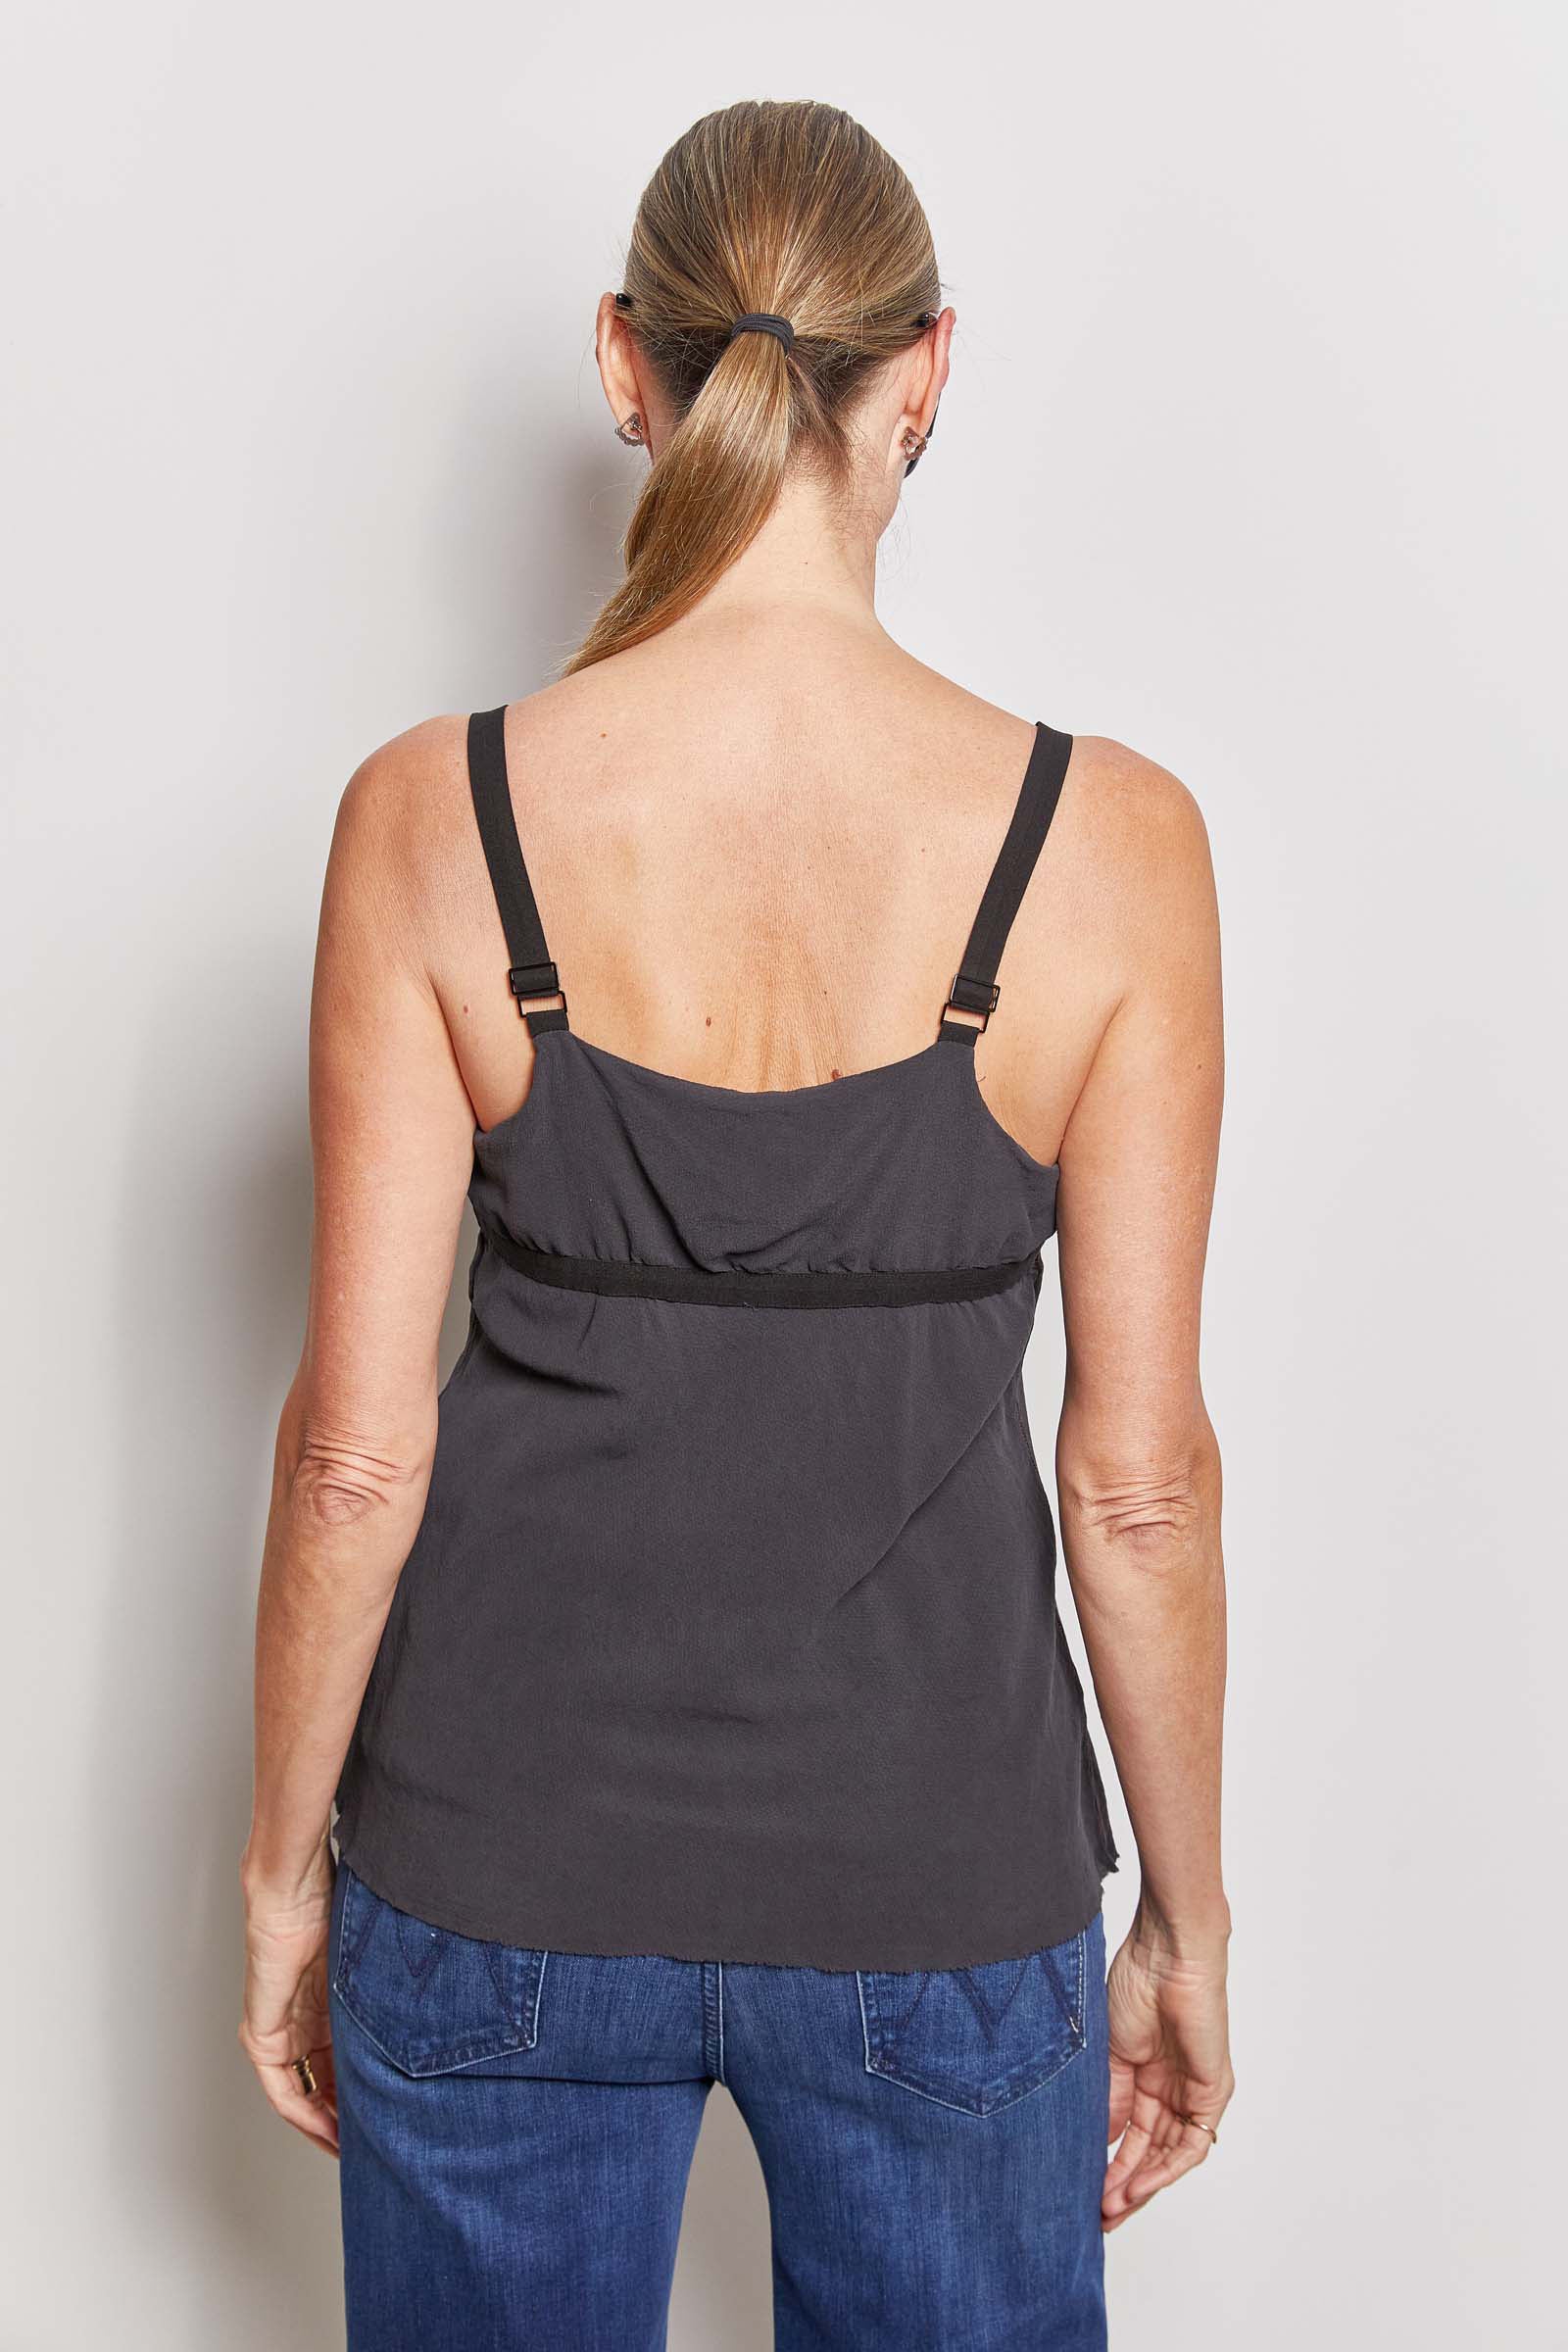 stone washed charcoal silk crepe de chine camisole tank.